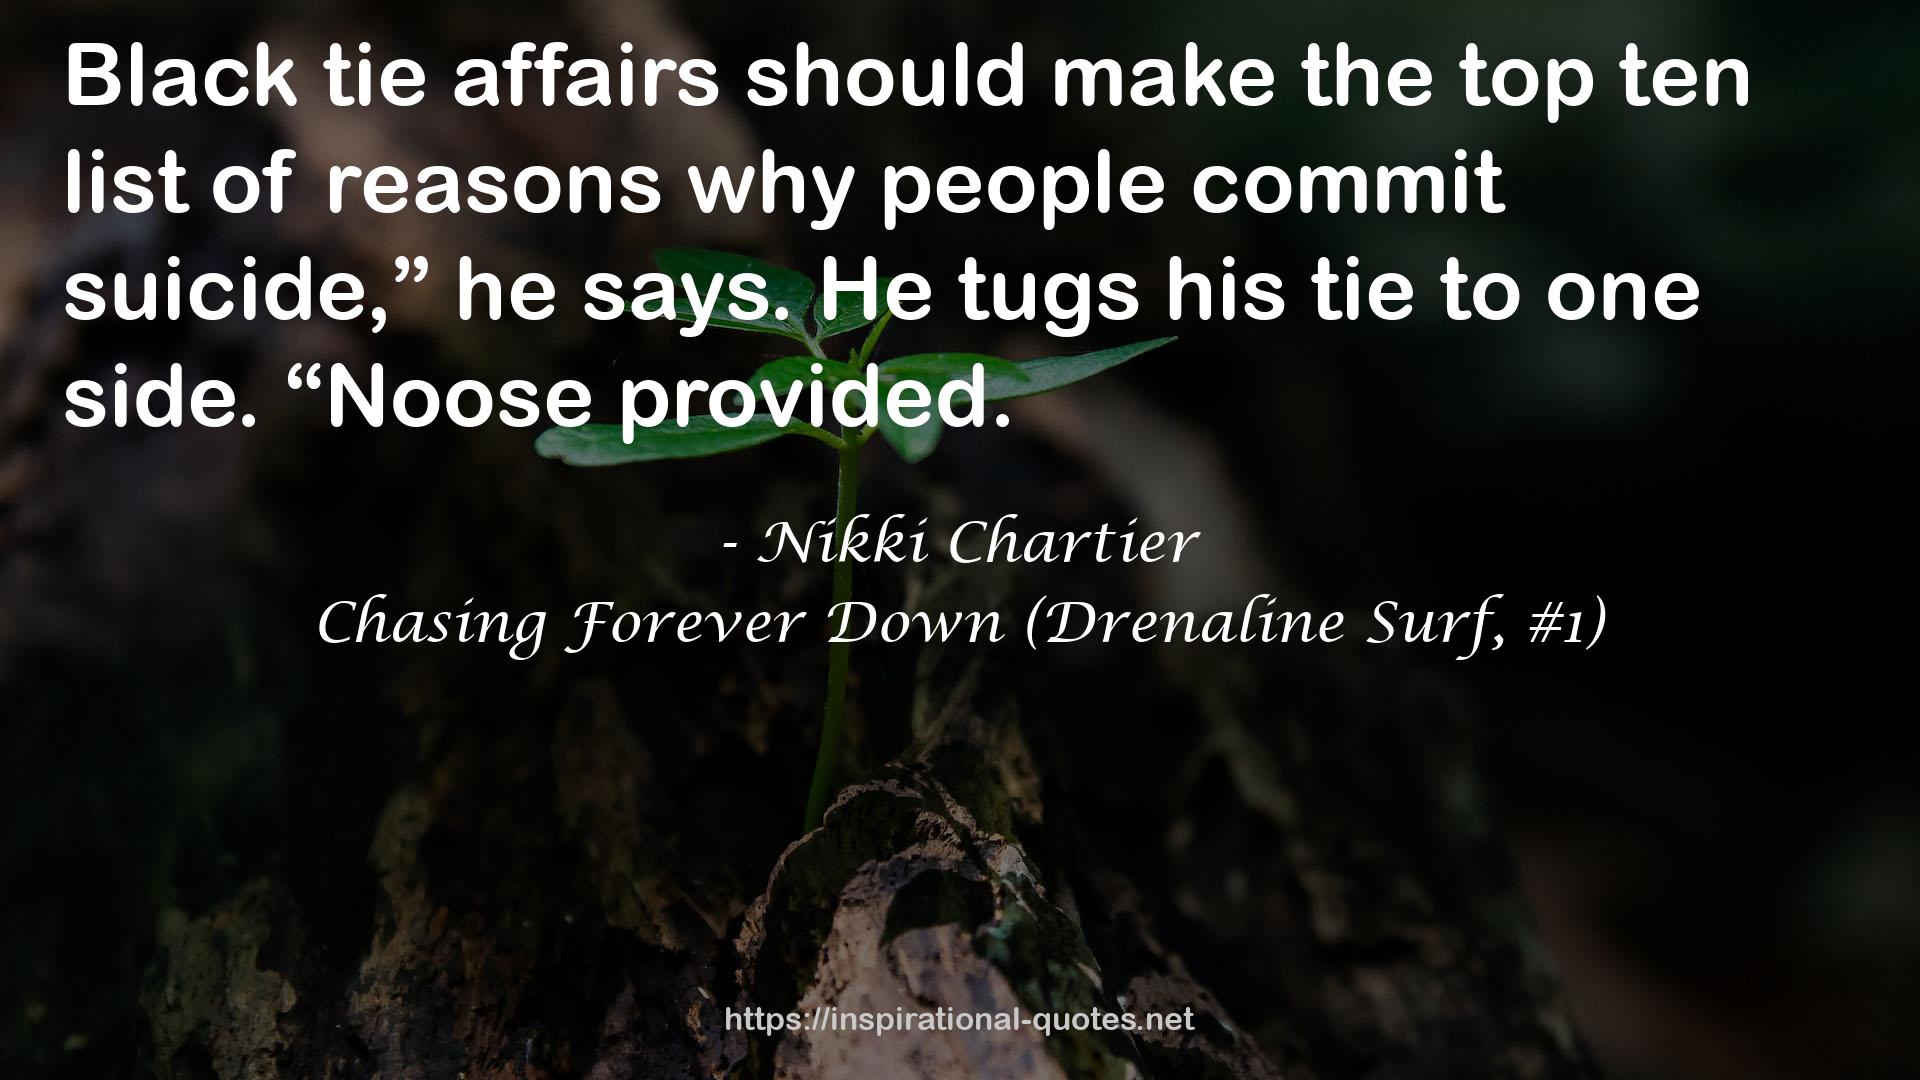 Chasing Forever Down (Drenaline Surf, #1) QUOTES